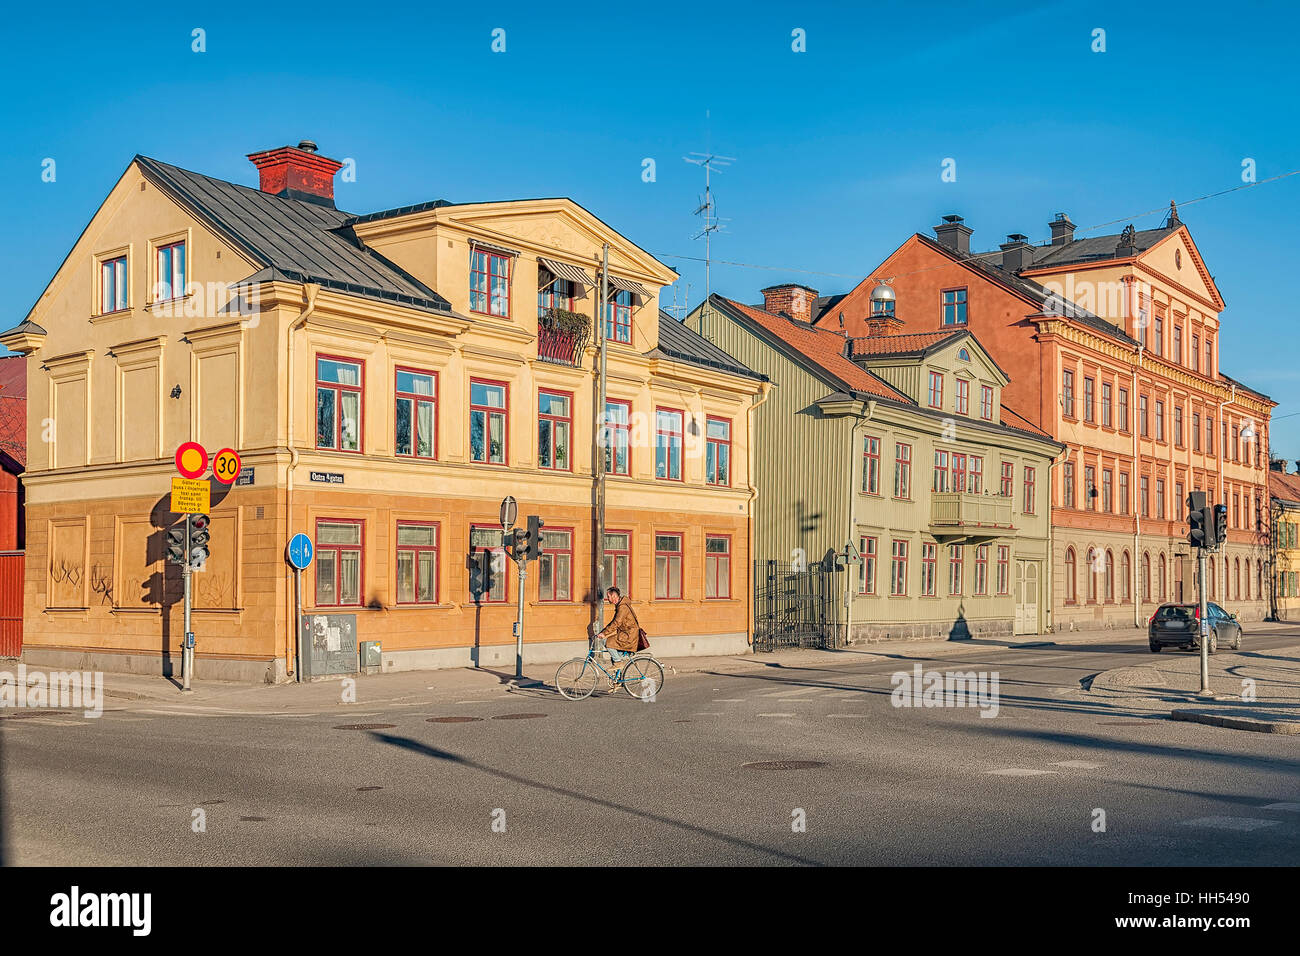 Sparse traffic on a street with historic buildings. Uppsala, Sweden. Stock Photo